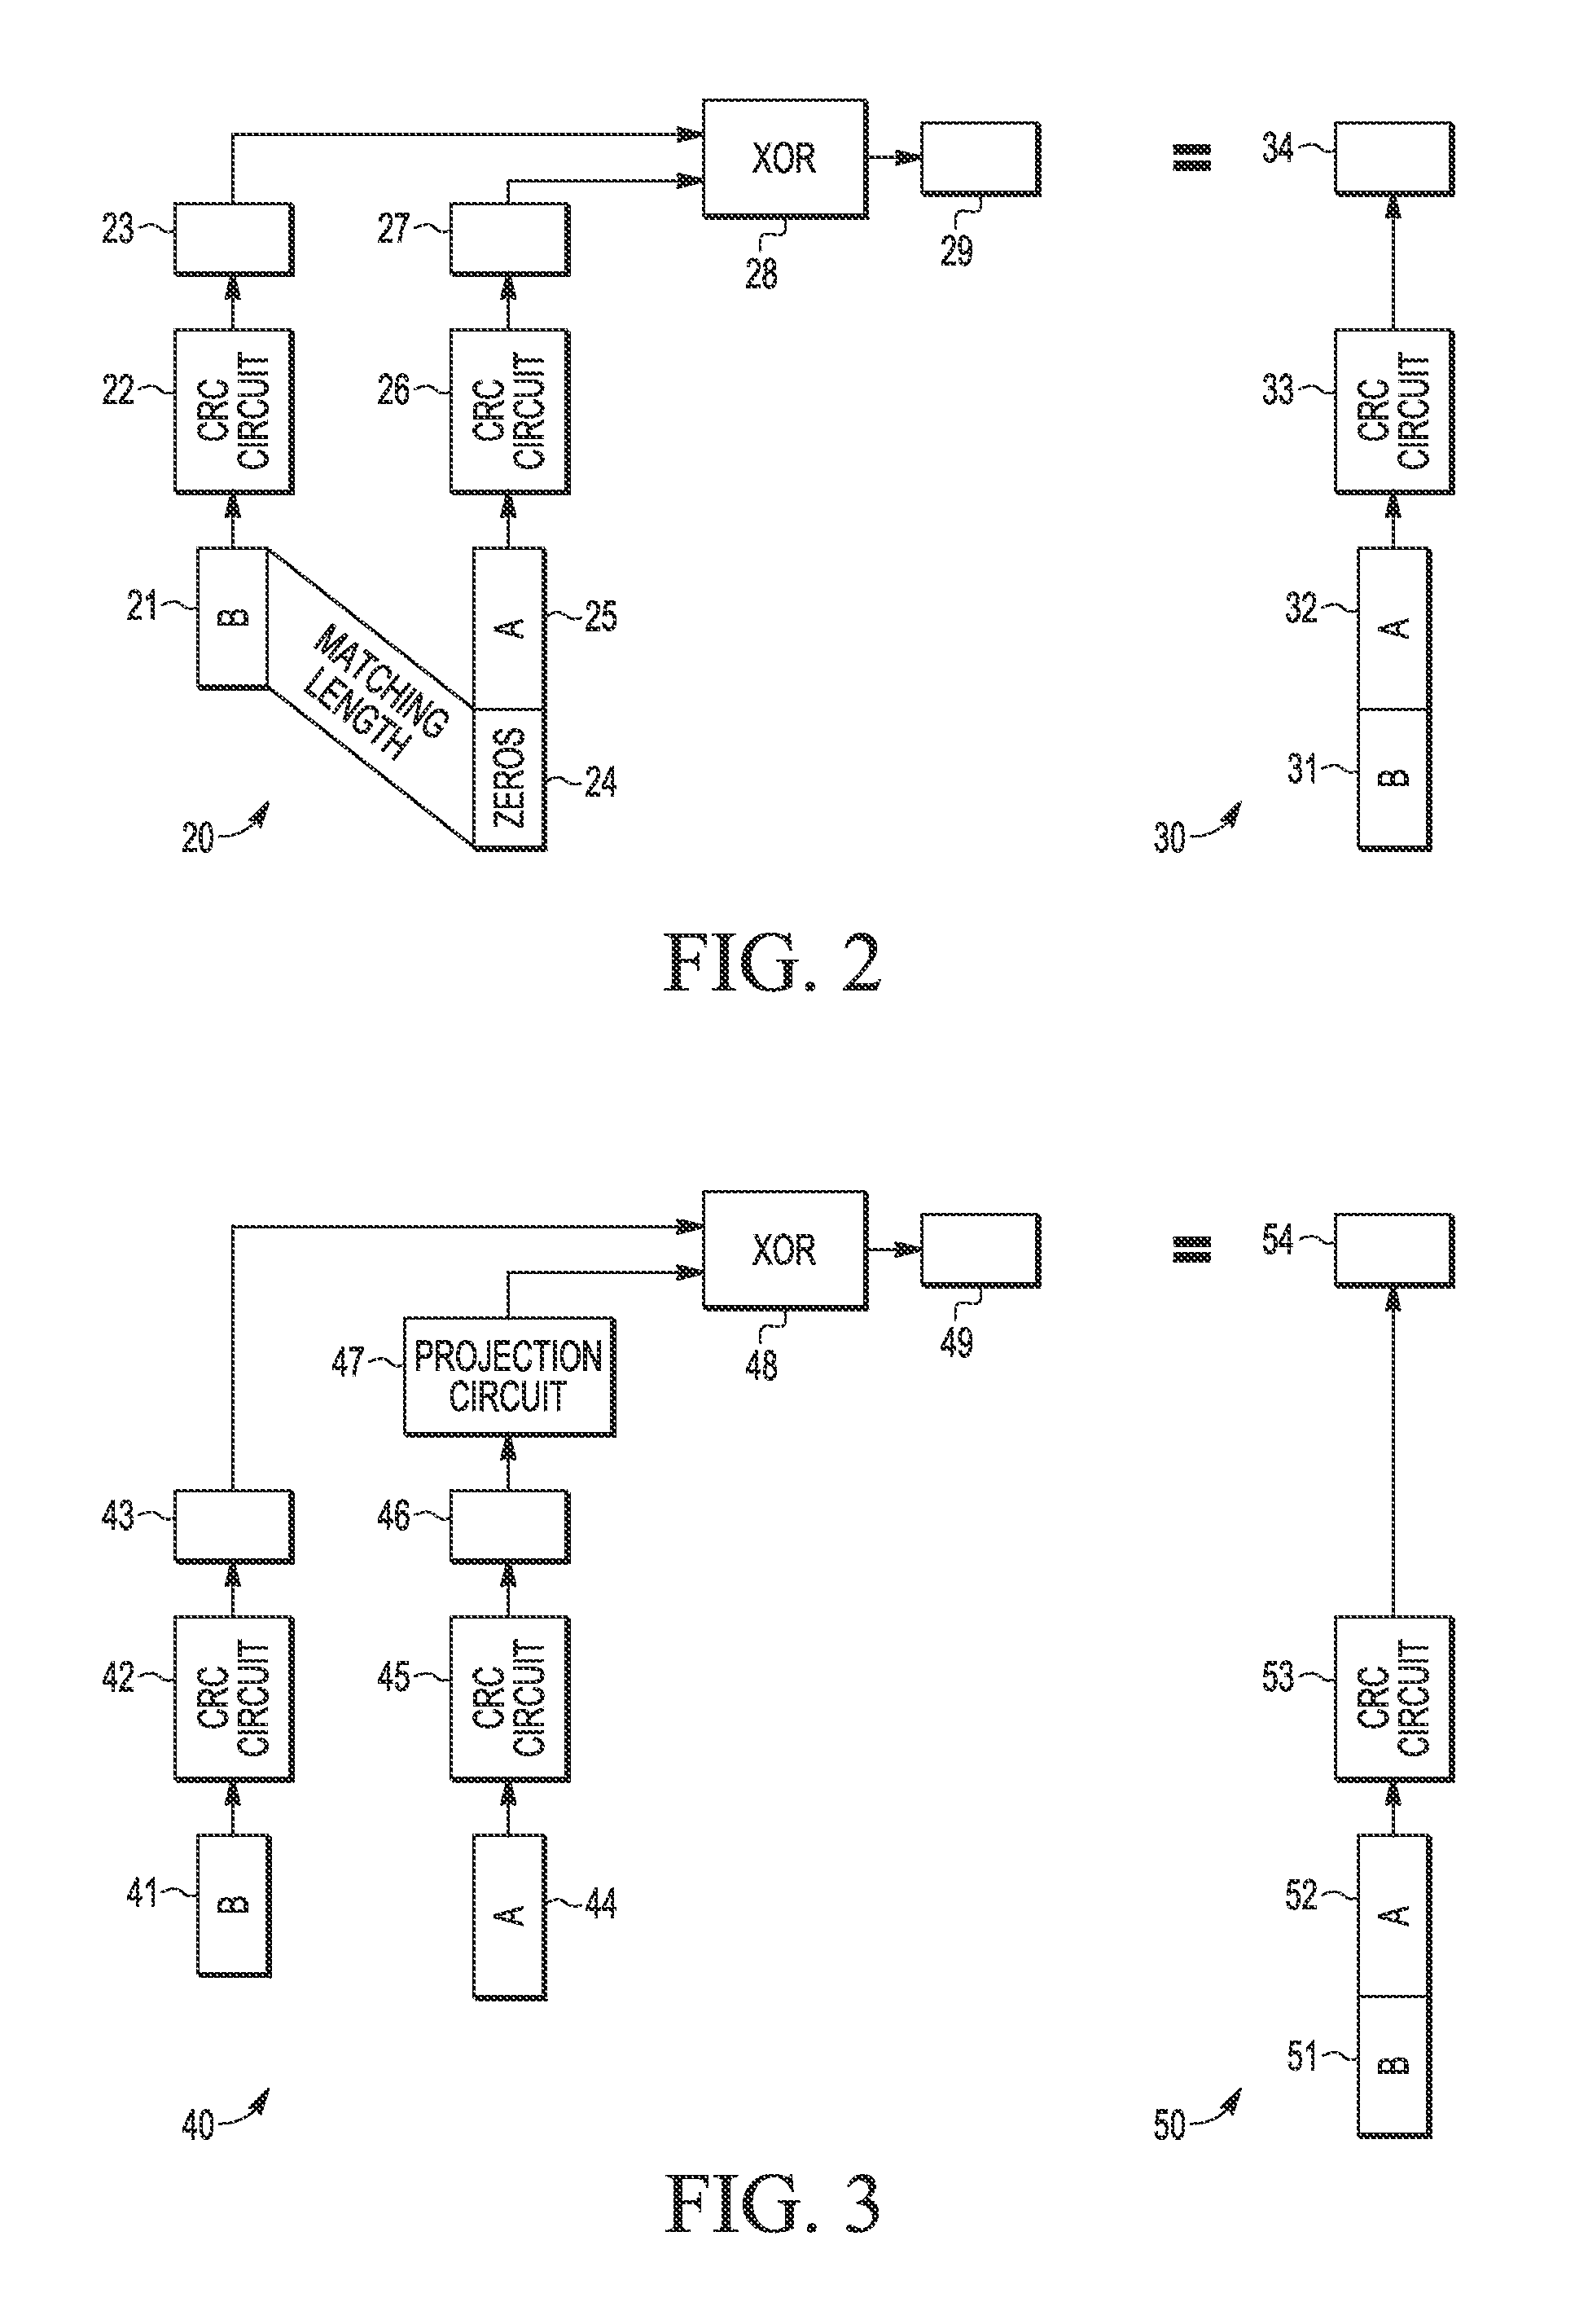 Method of Offloading Cyclic Redundancy Check on Portions of a Packet